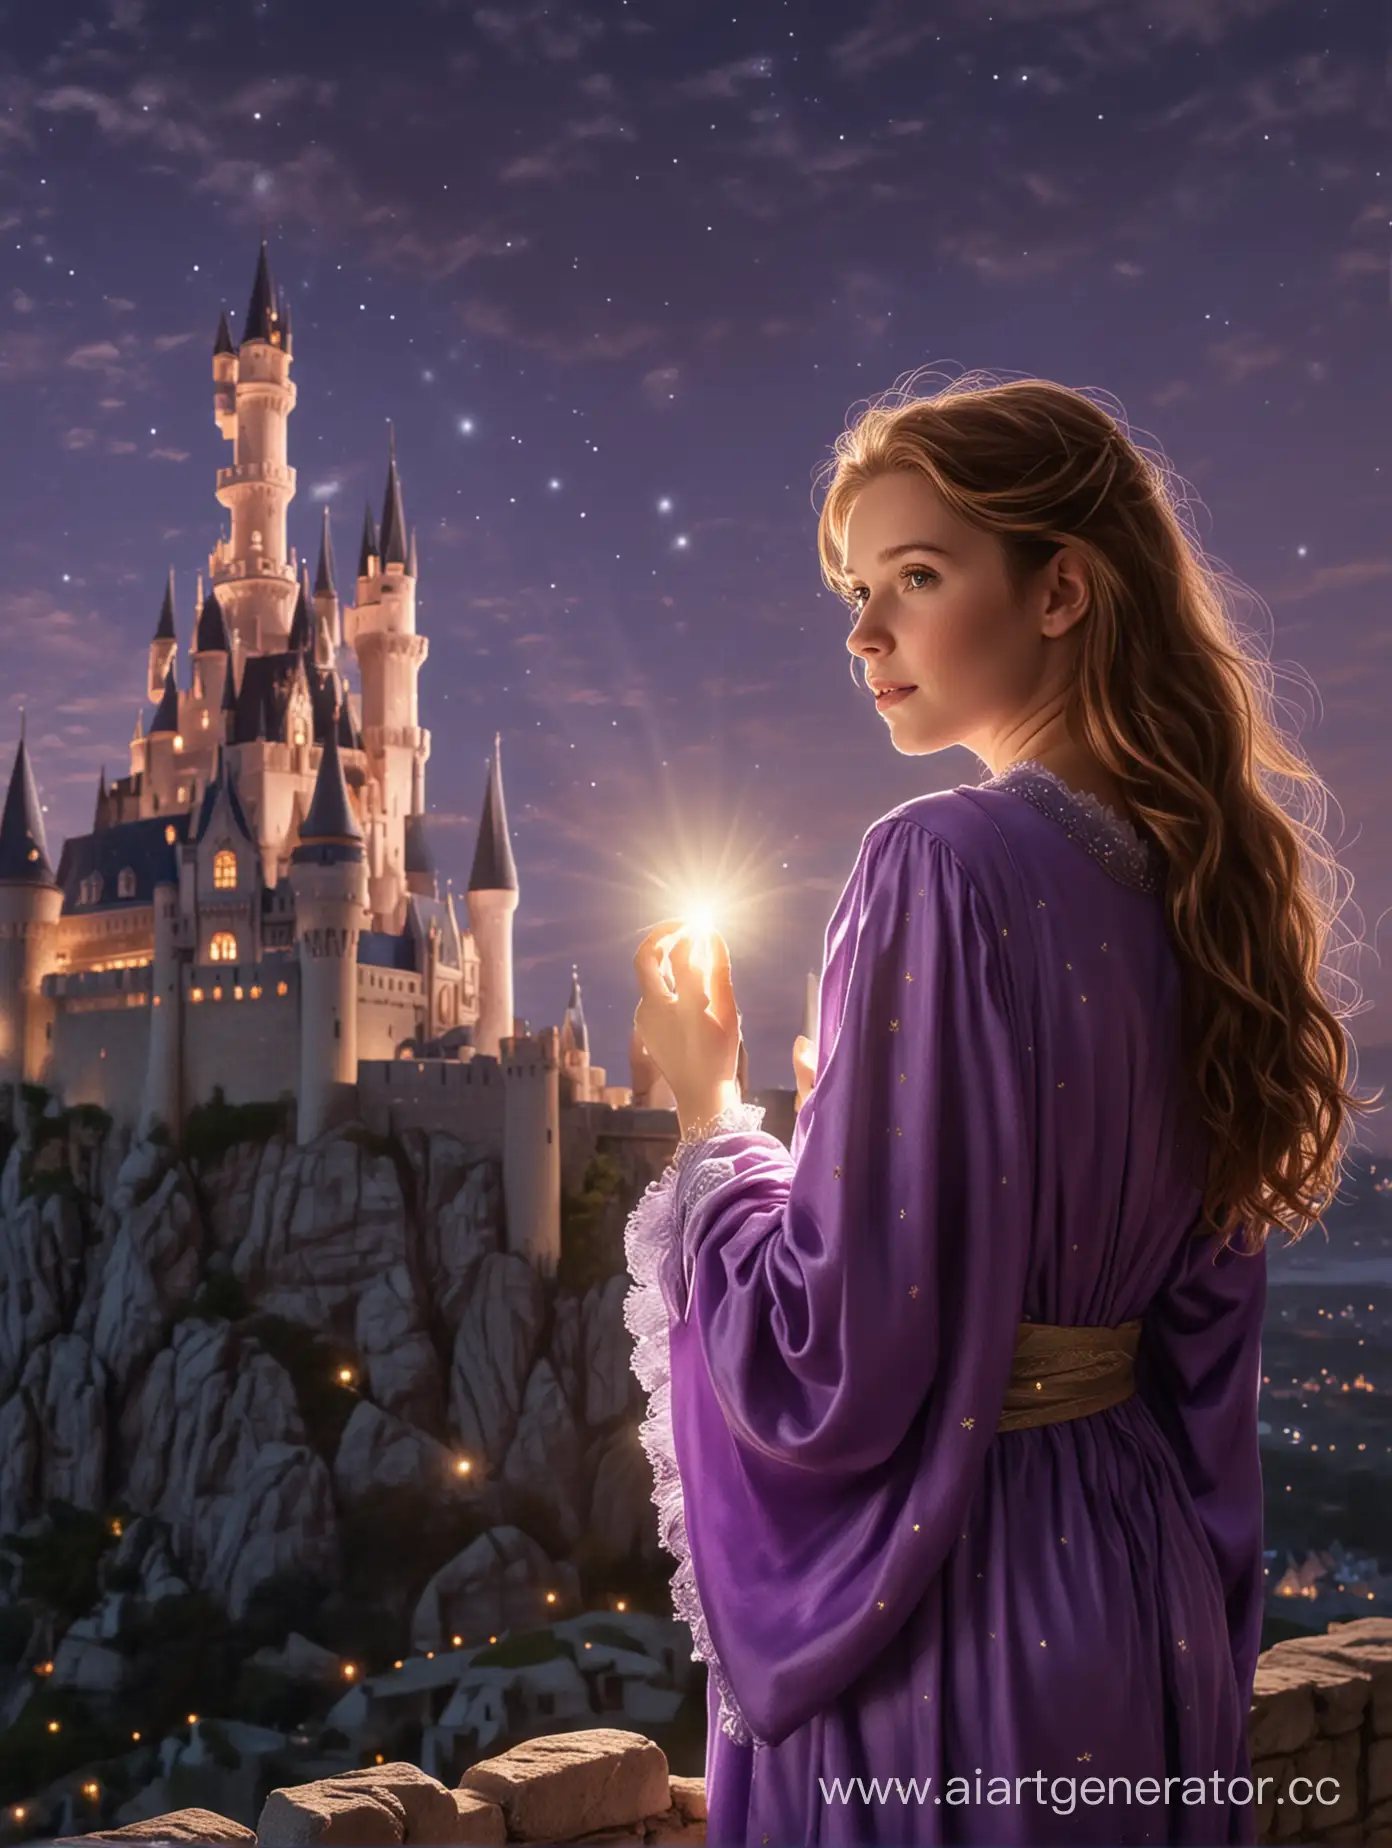 The castle is visible in the distance. In front is a girl with brown hair, in whose hands a magical light shines. She's wearing a purple robe.